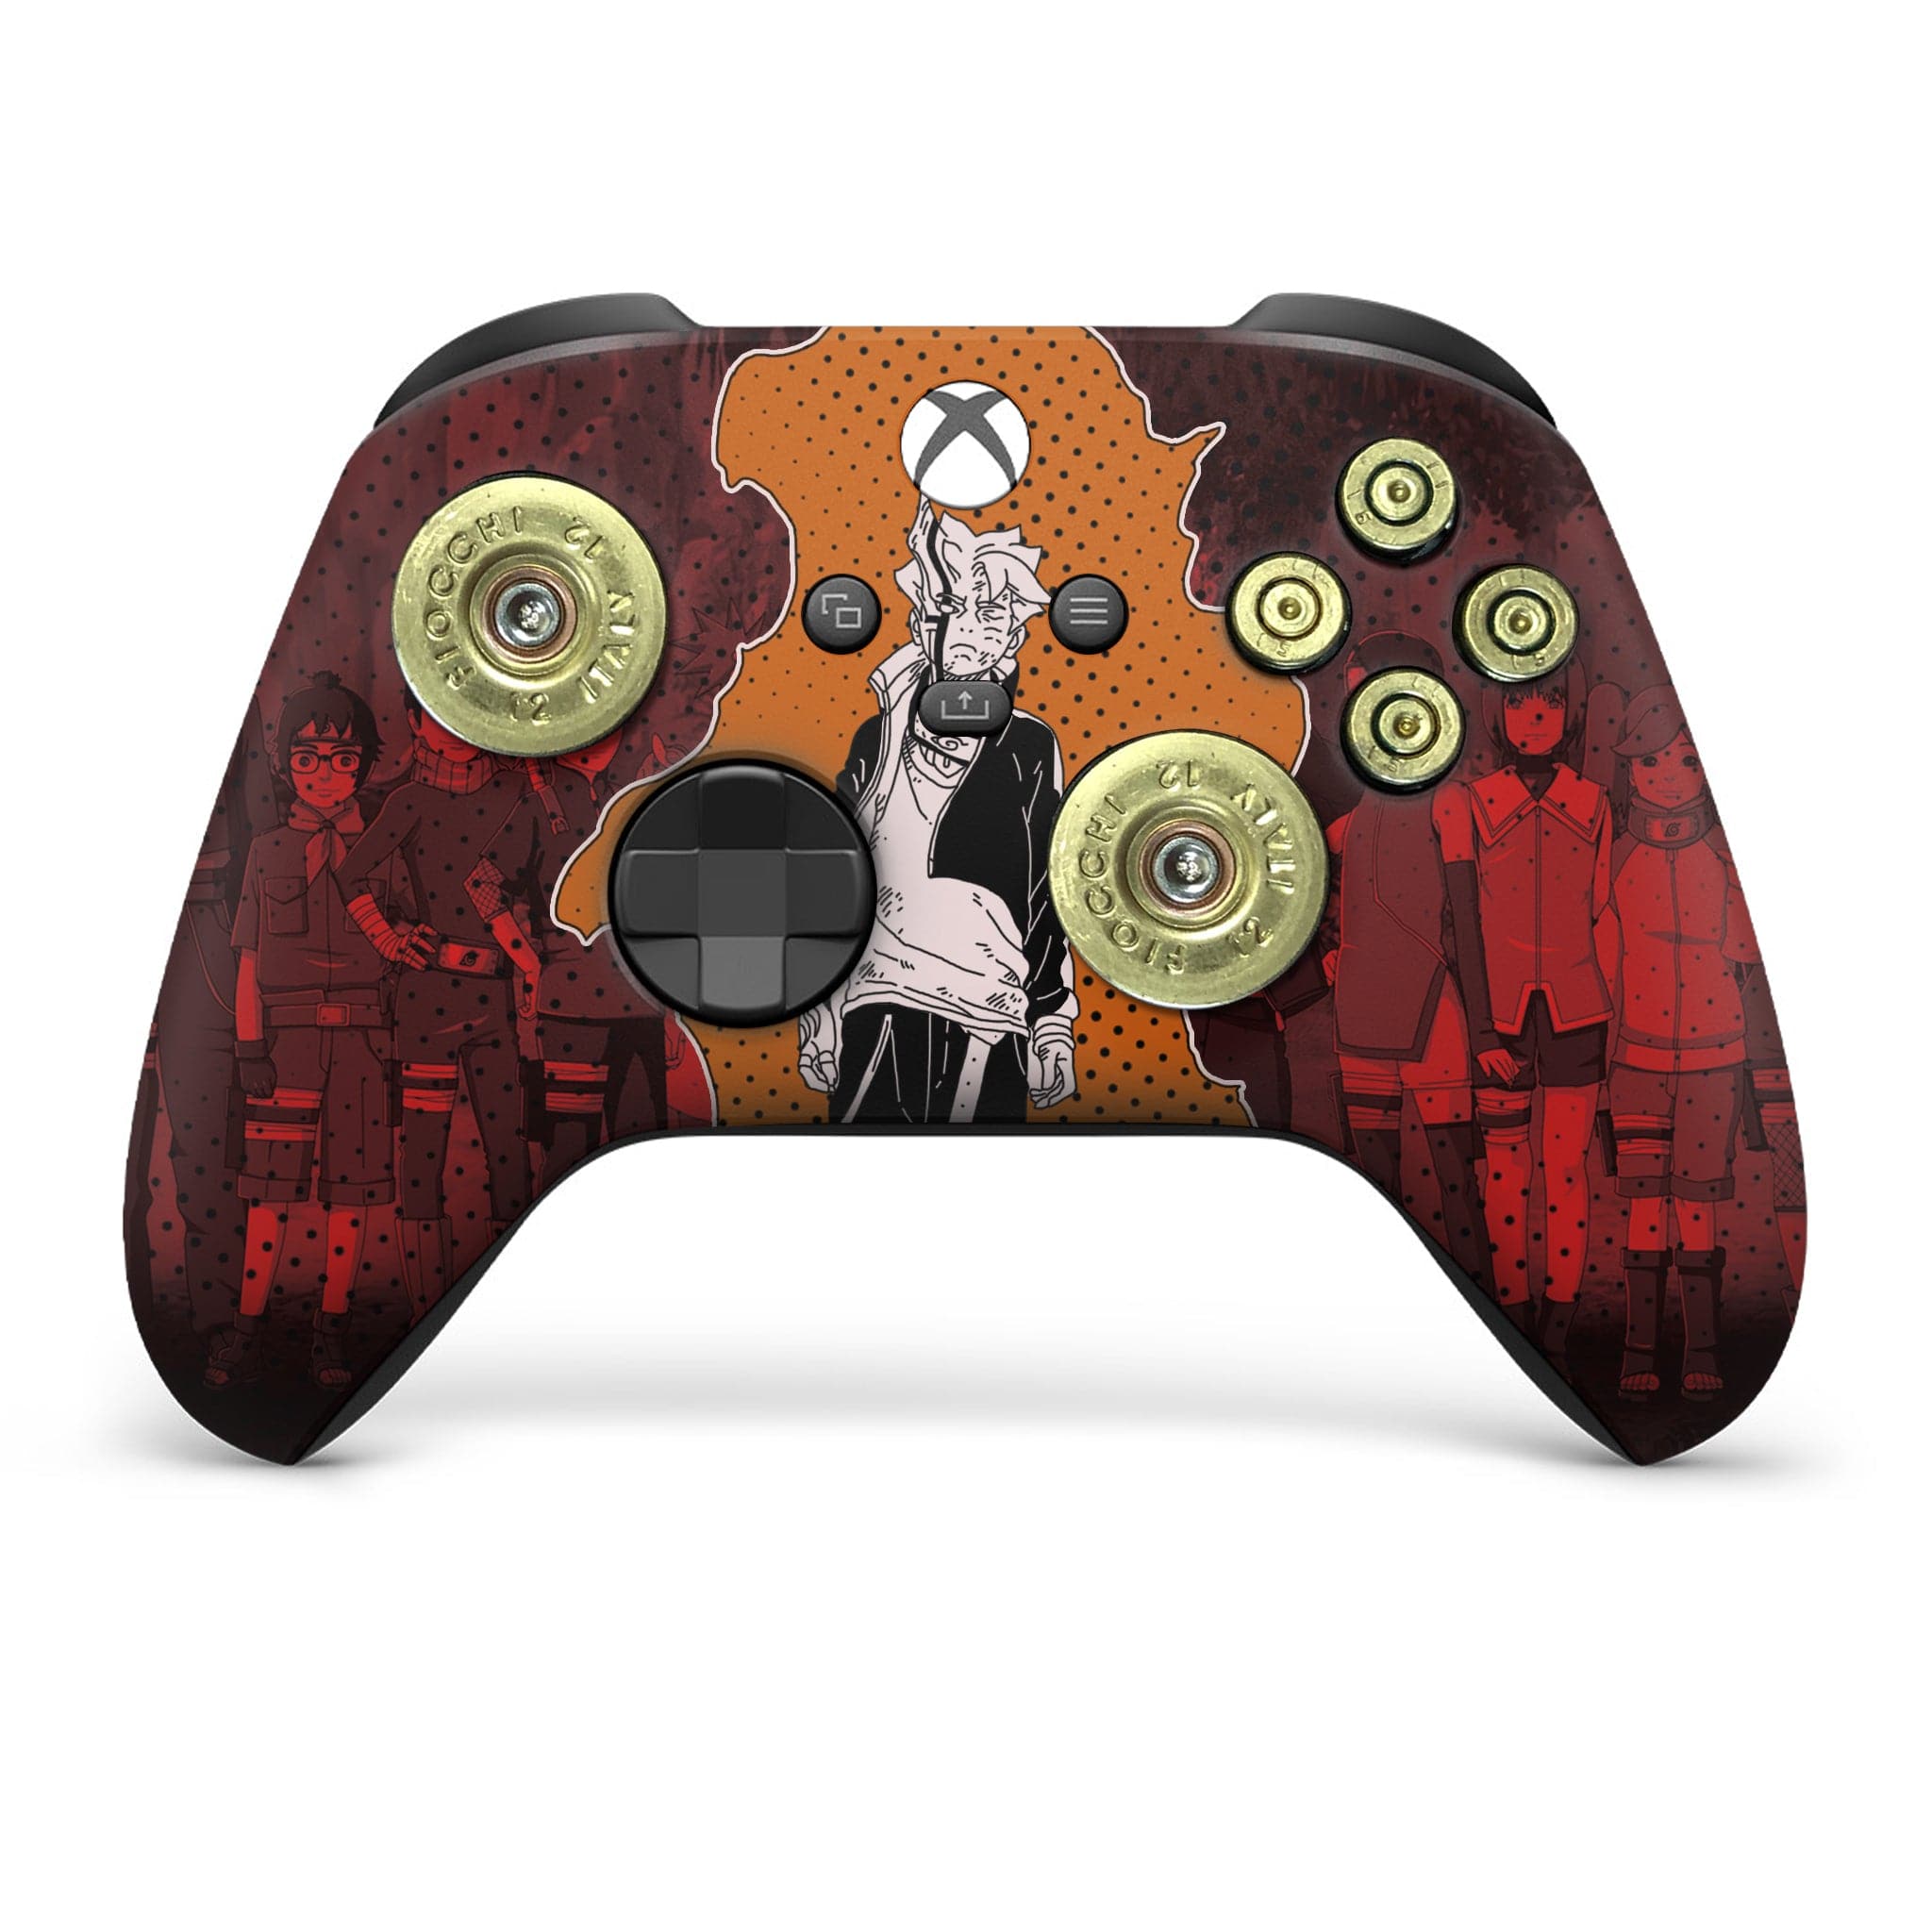 BORUTO inspired x box series x controller with bullet buttons